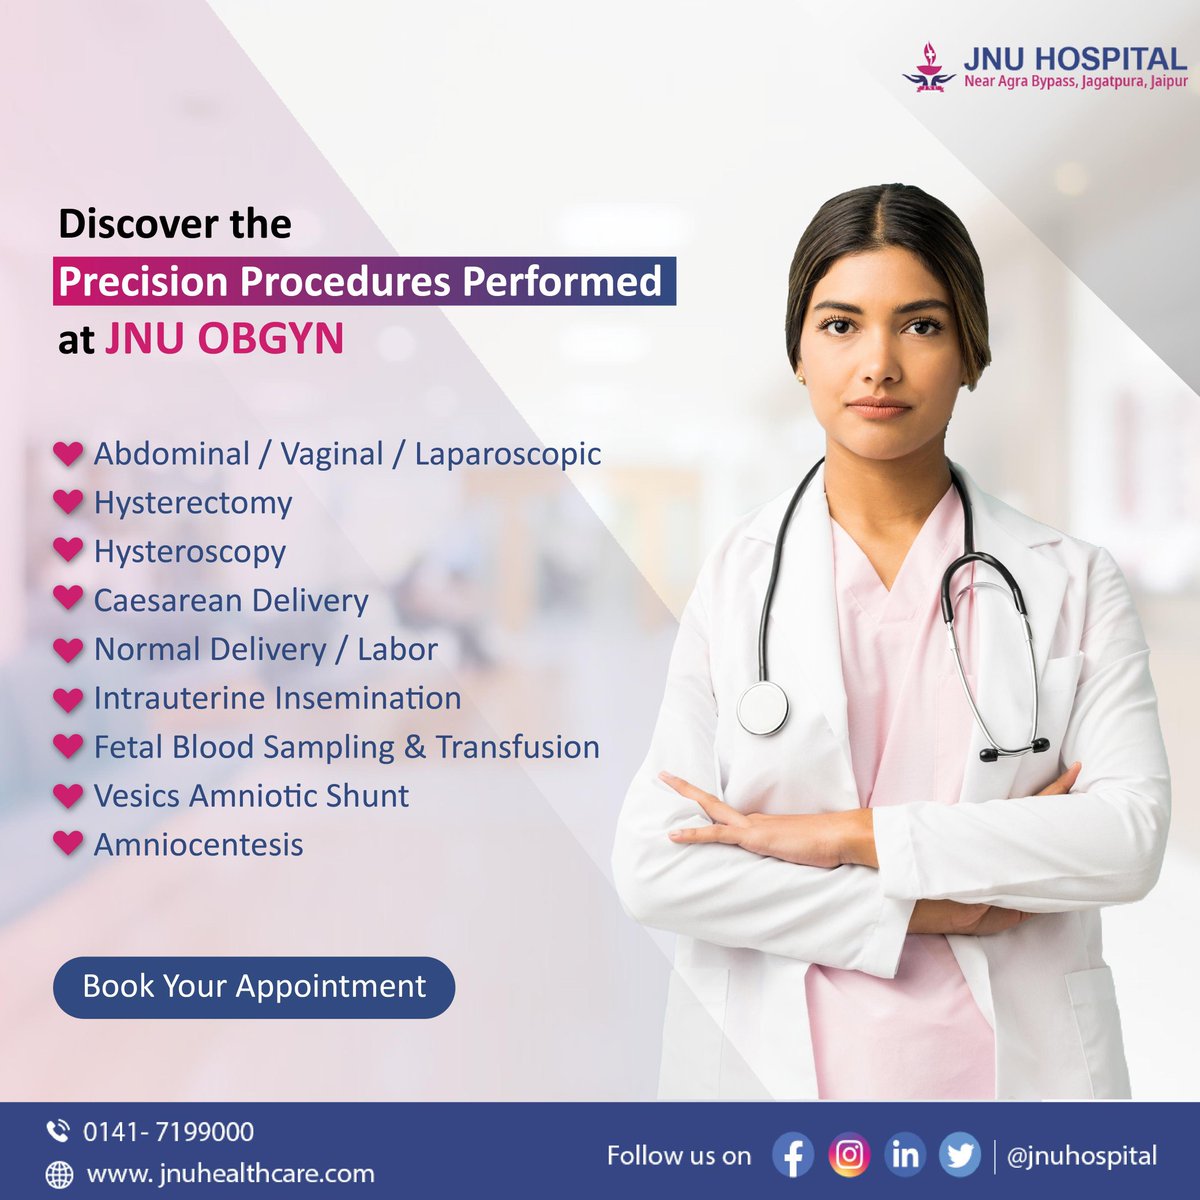 Explore the expertly performed interventions at JNU OBGYN, from advanced hysterectomies to delicate fetal blood sampling. Our commitment to precision ensures the highest standard of care for women's health. 

#OBGYNCare #PrecisionProcedures #WomensHealth